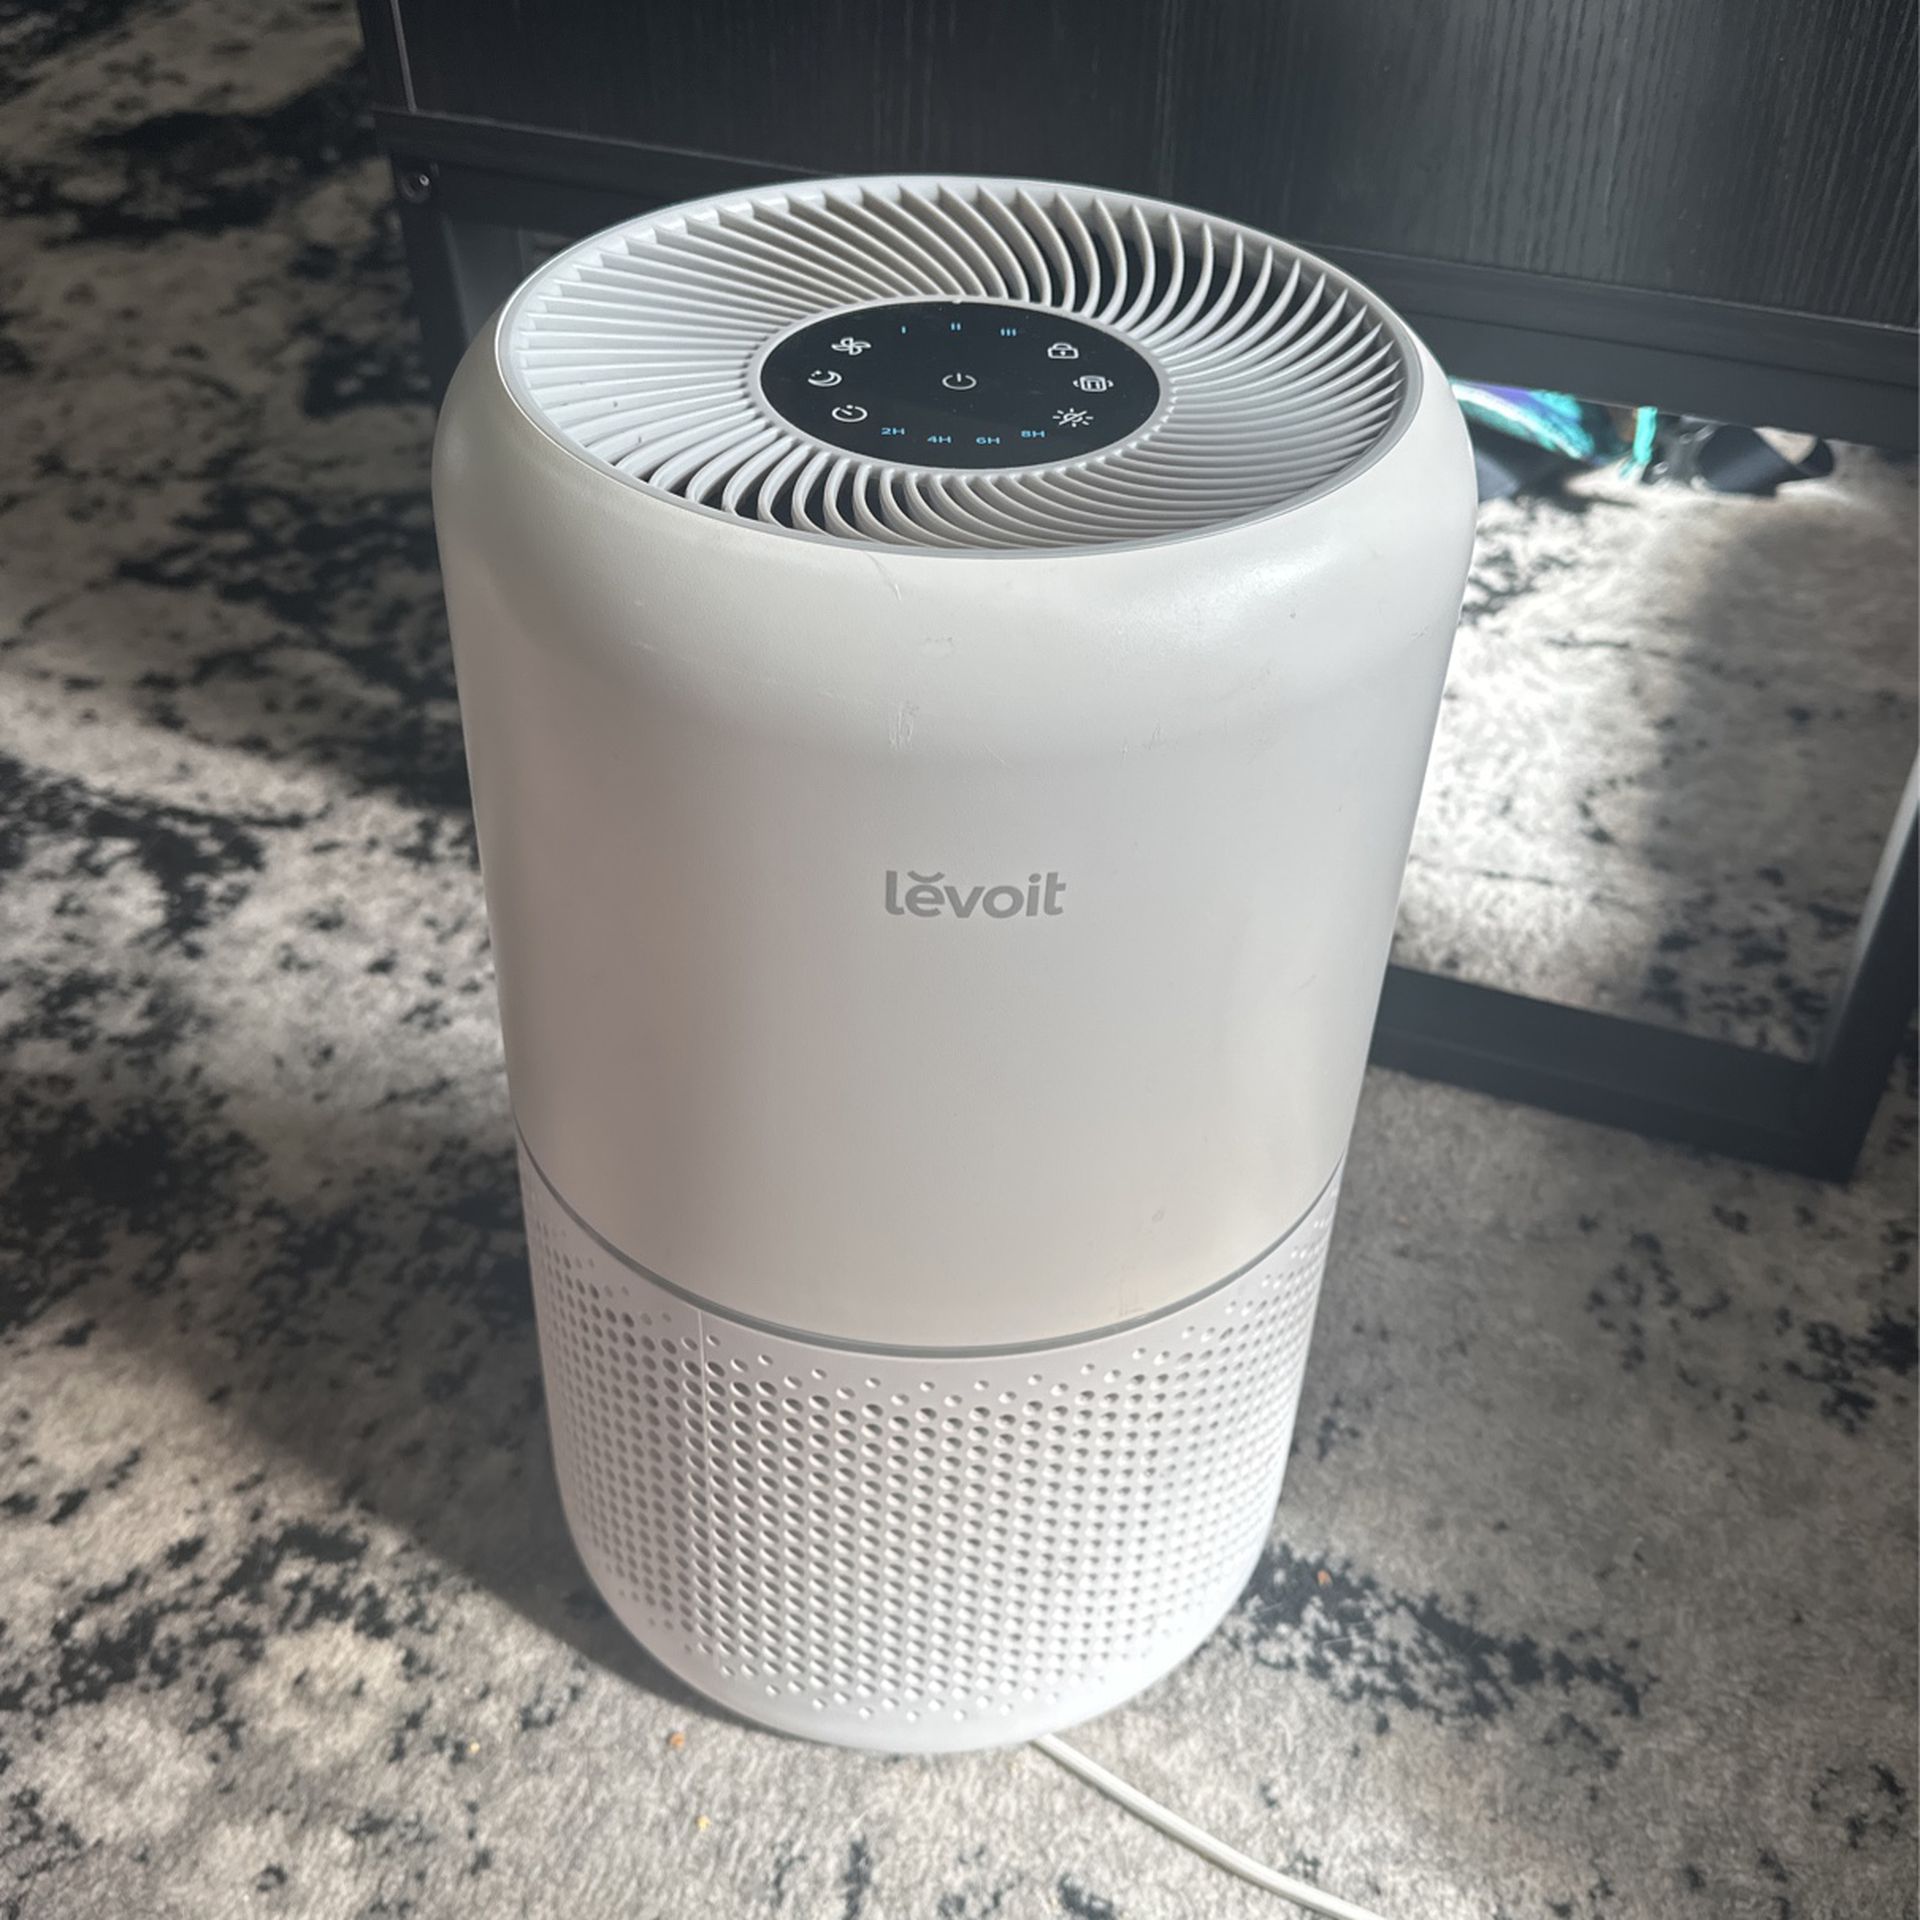 Fan and Air Purifier - Levoit